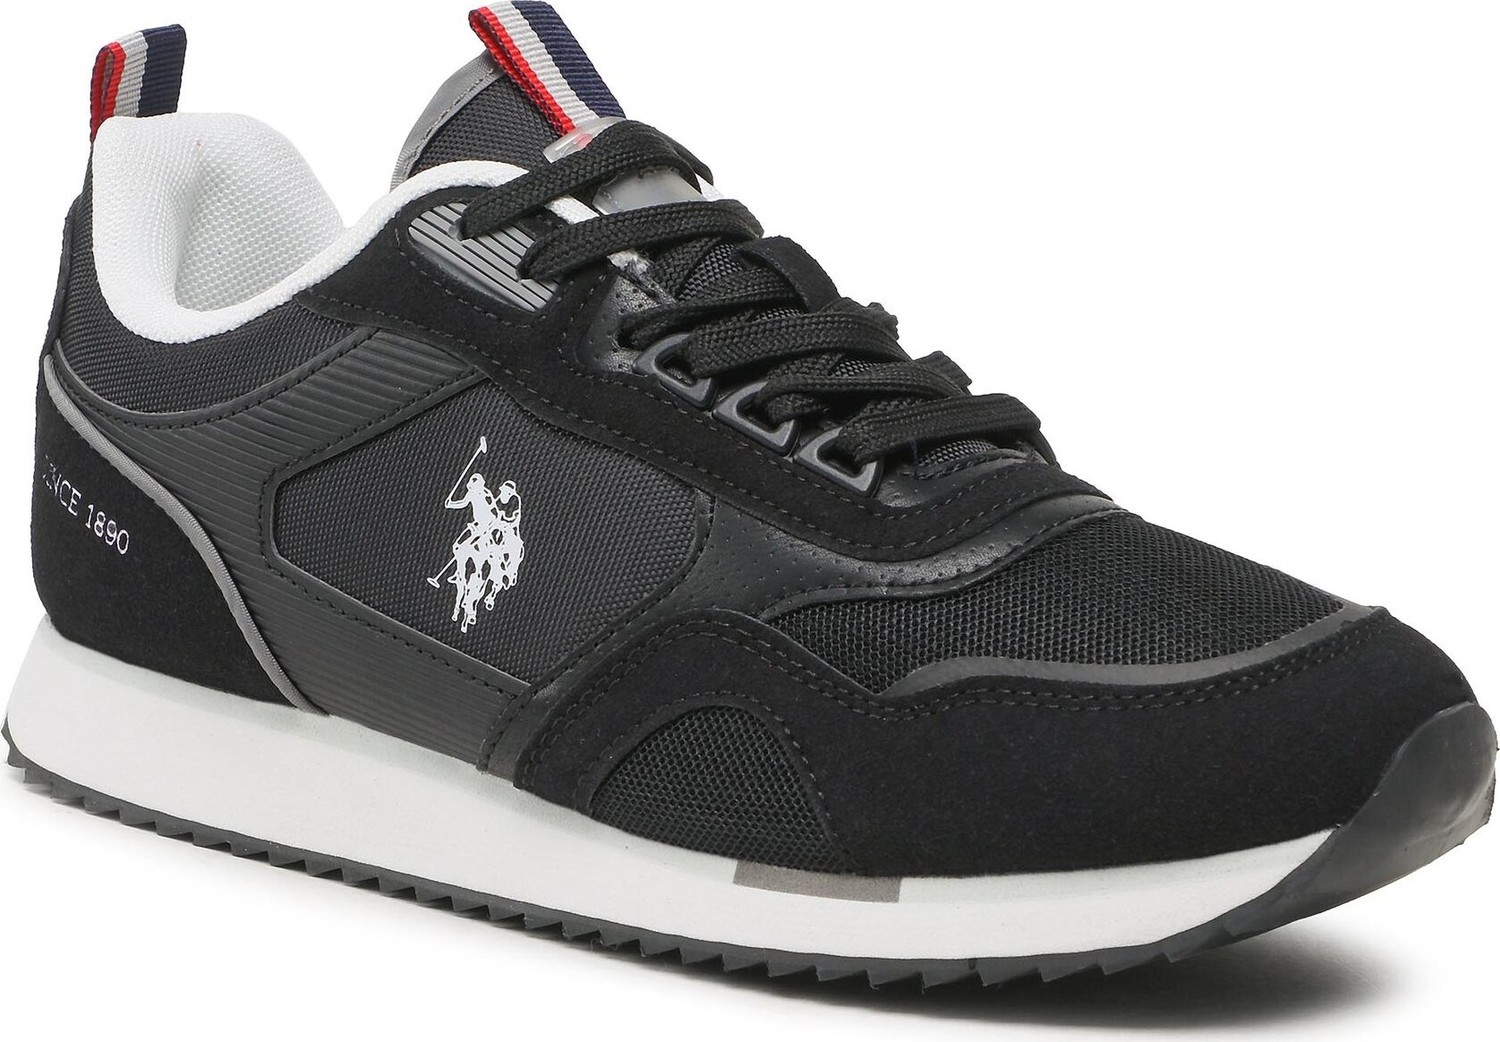 Sneakersy U.S. Polo Assn. Ethan ETHAN001 BLK-GRY01